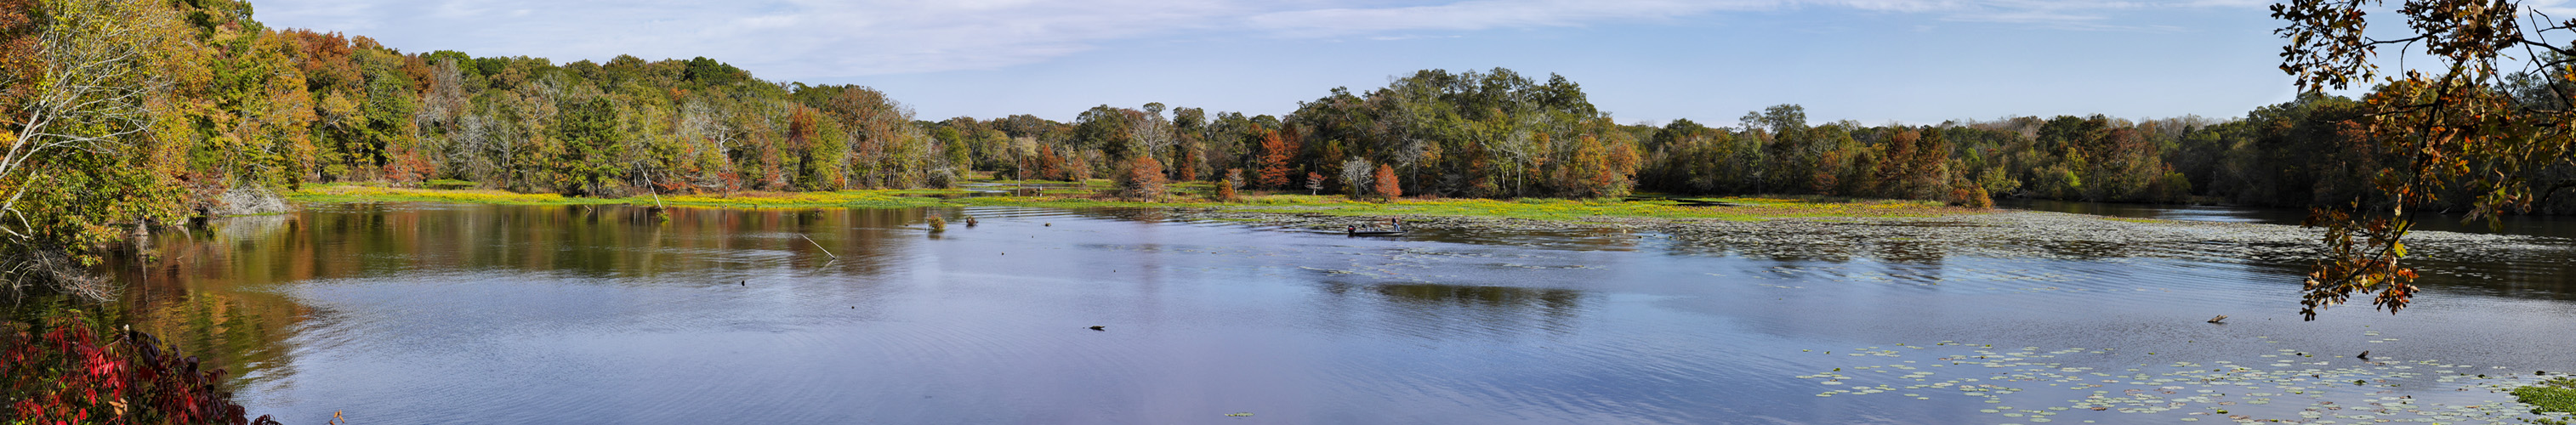 Riverbend on the Natchez Trace Fall 2014